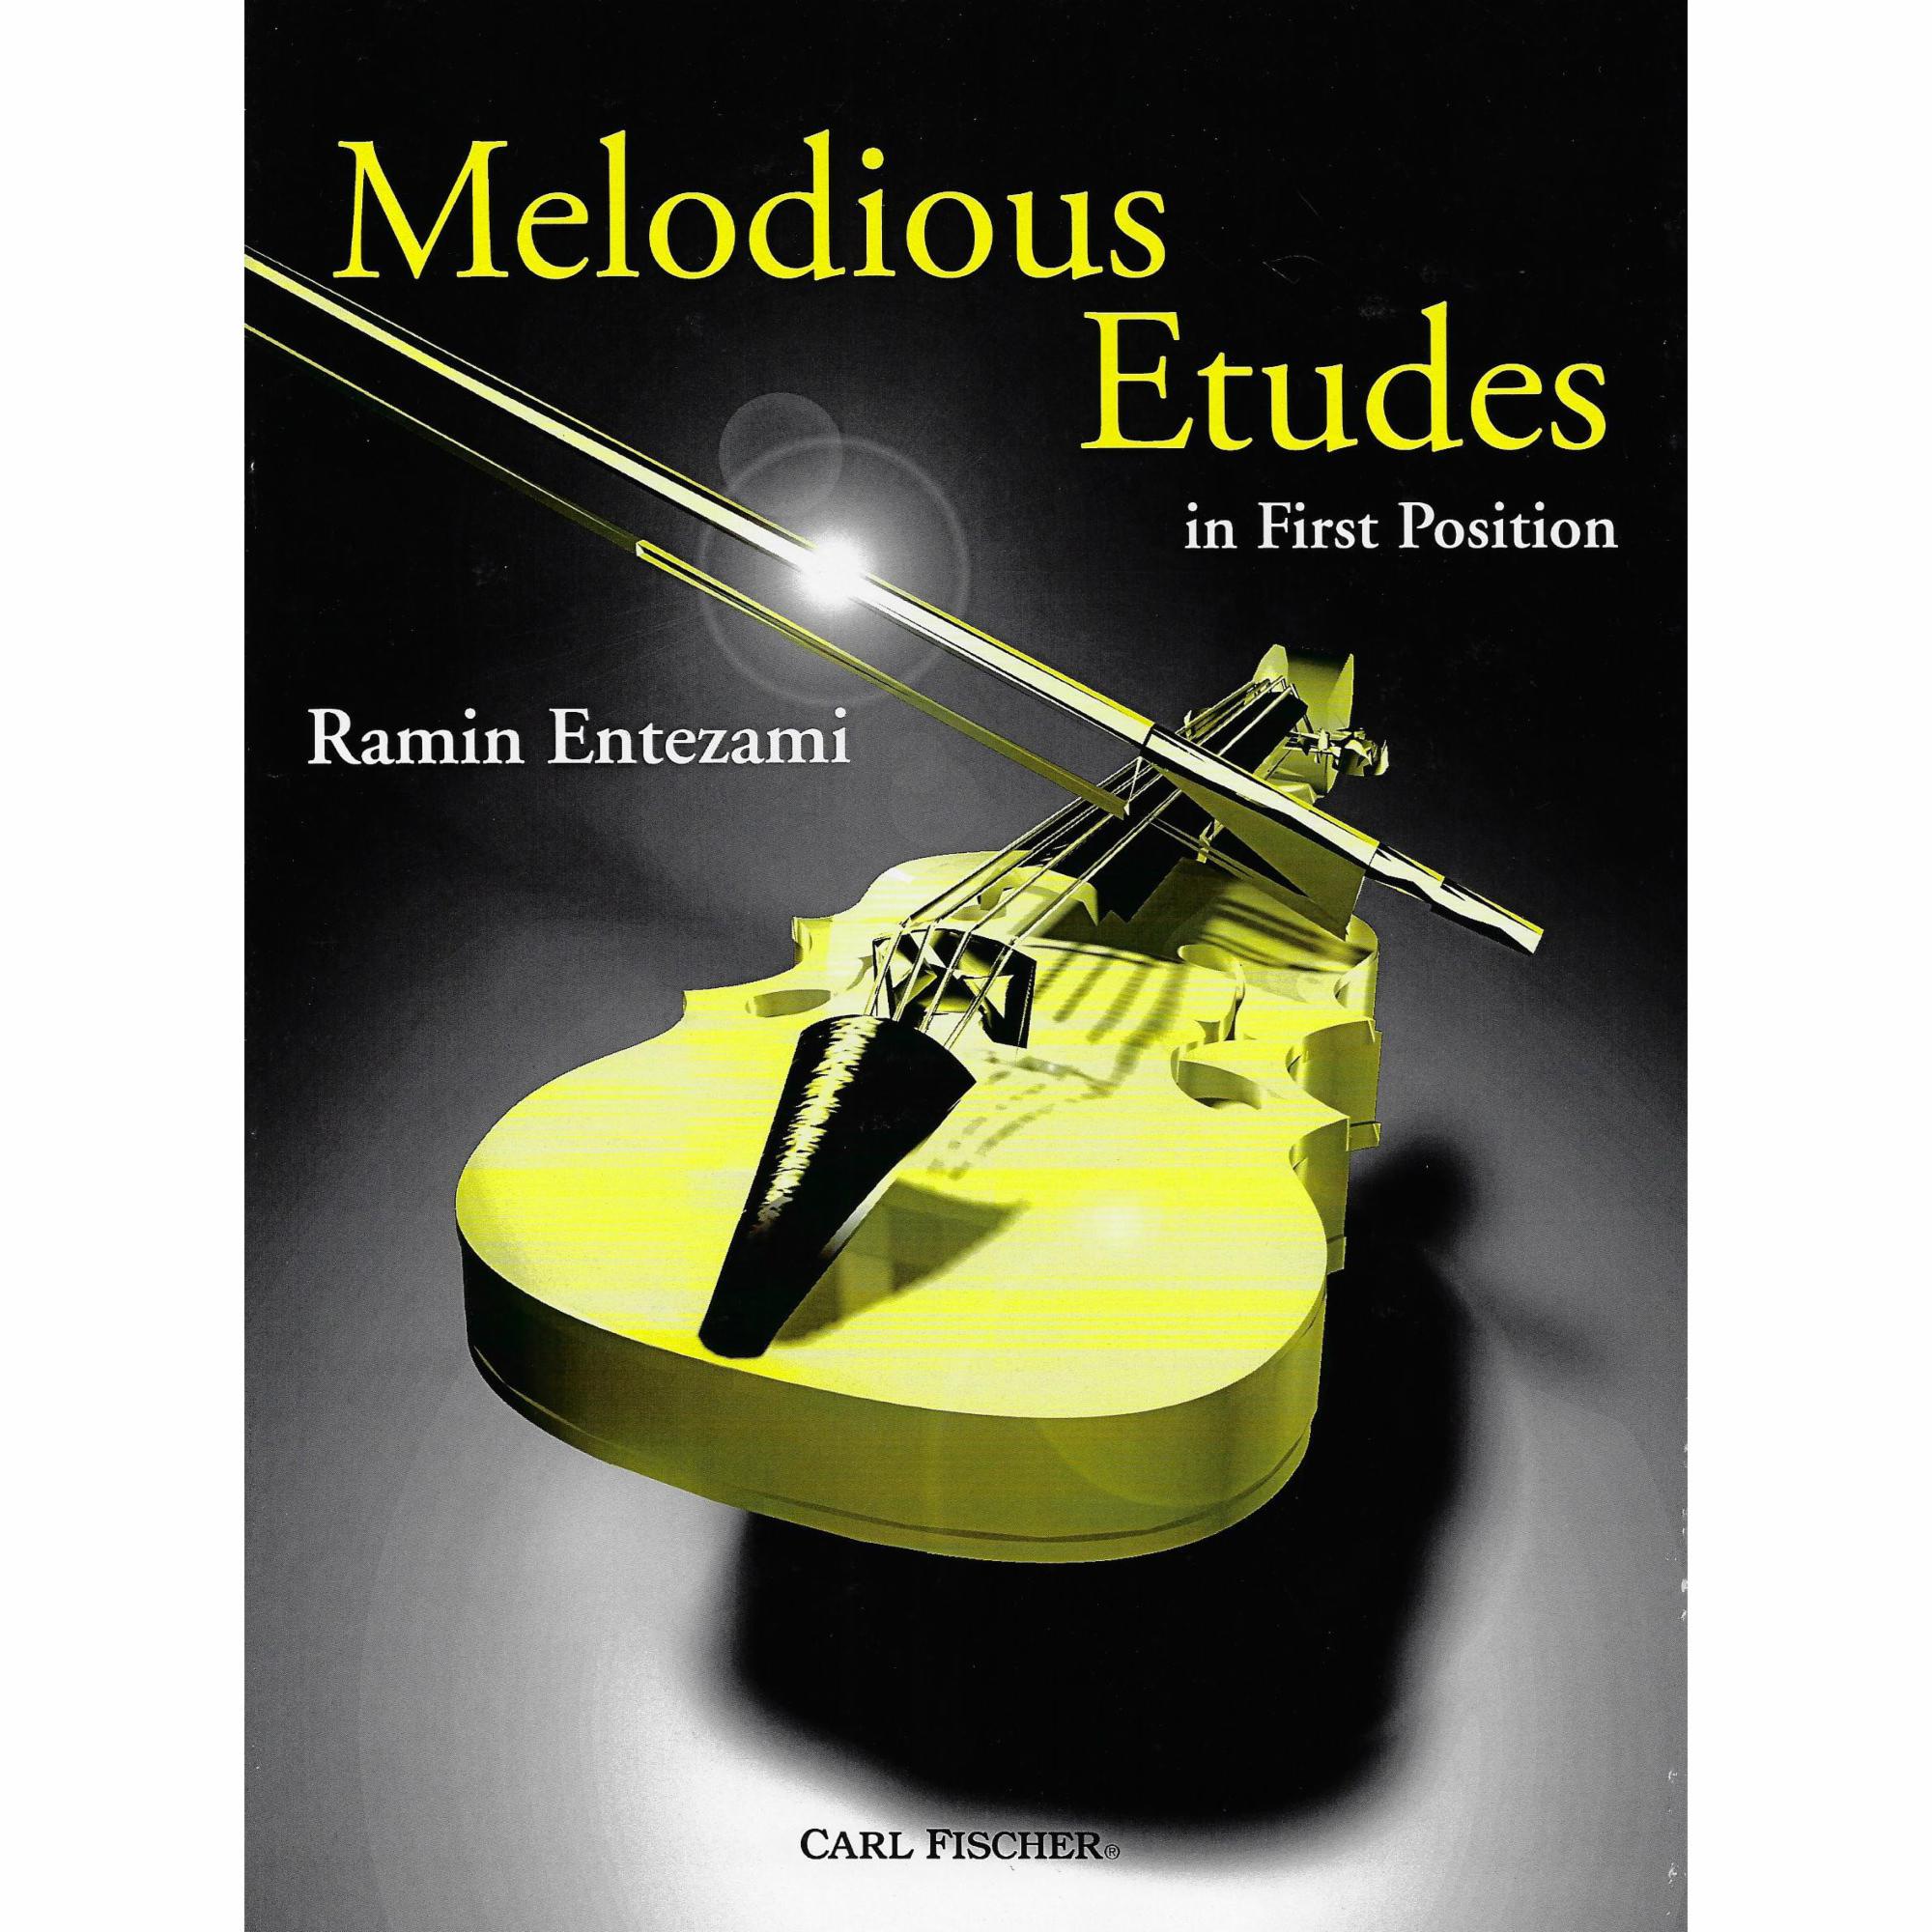 Melodious Etudes in First Position for Violin